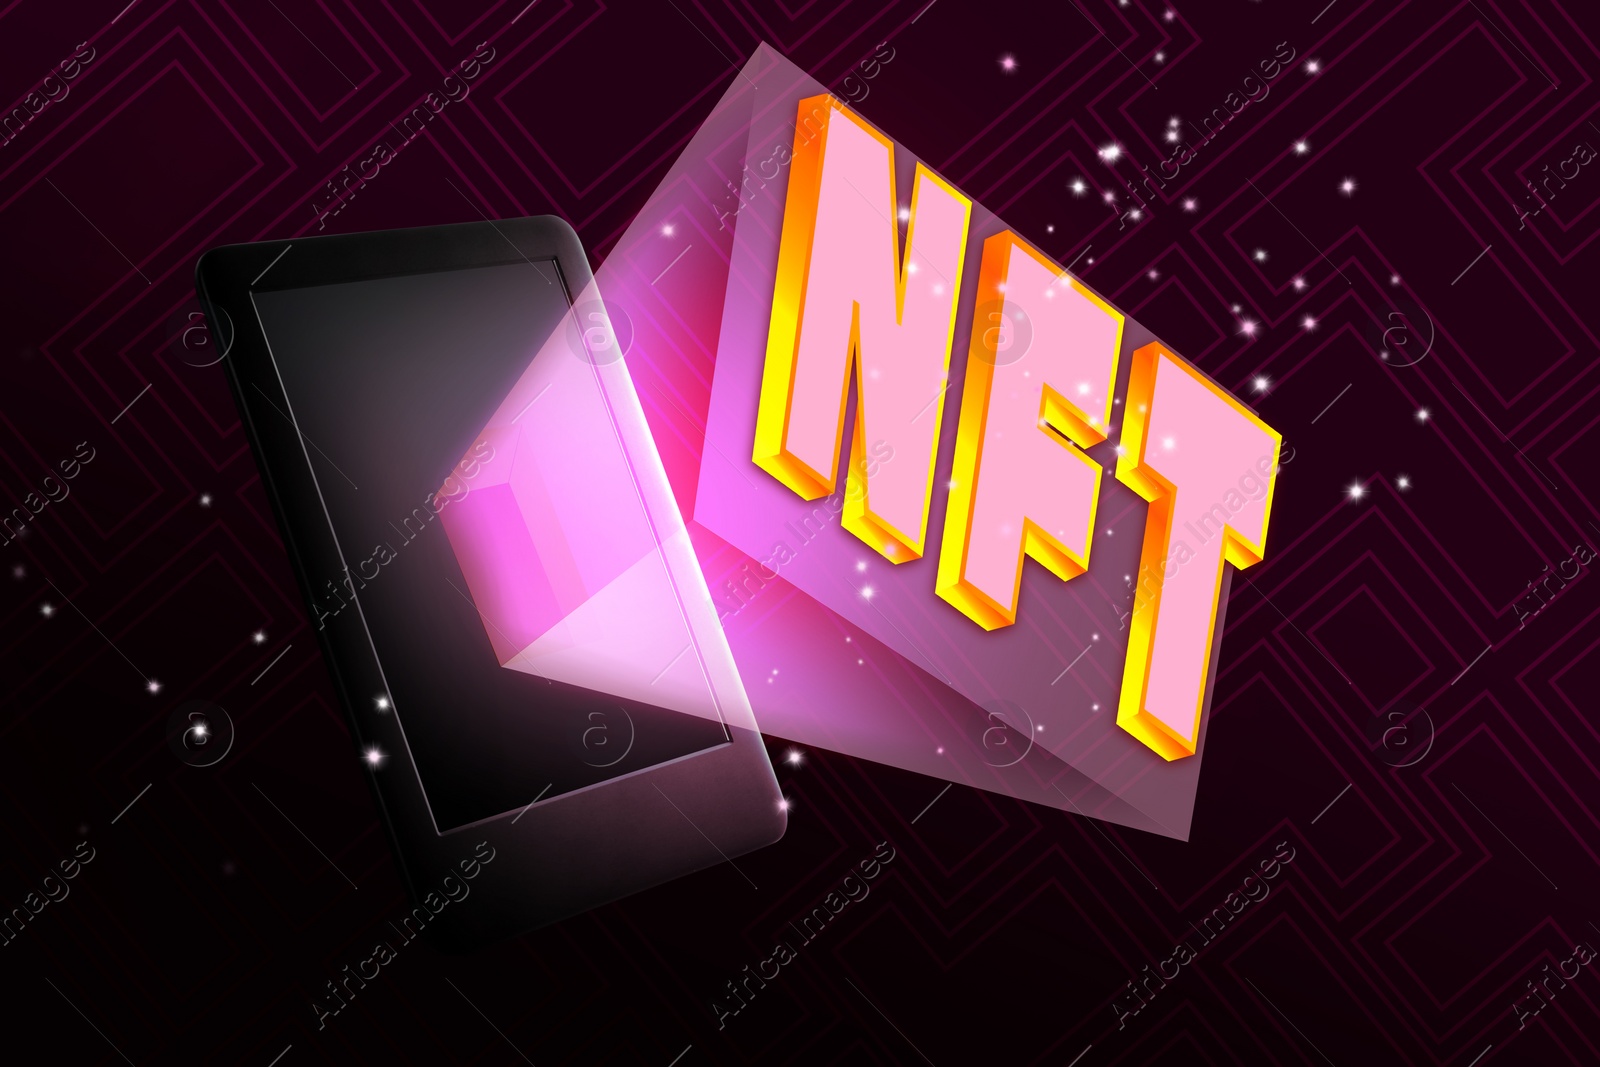 Image of Abbreviation NFT (non-fungible token) and device on purple gradient background